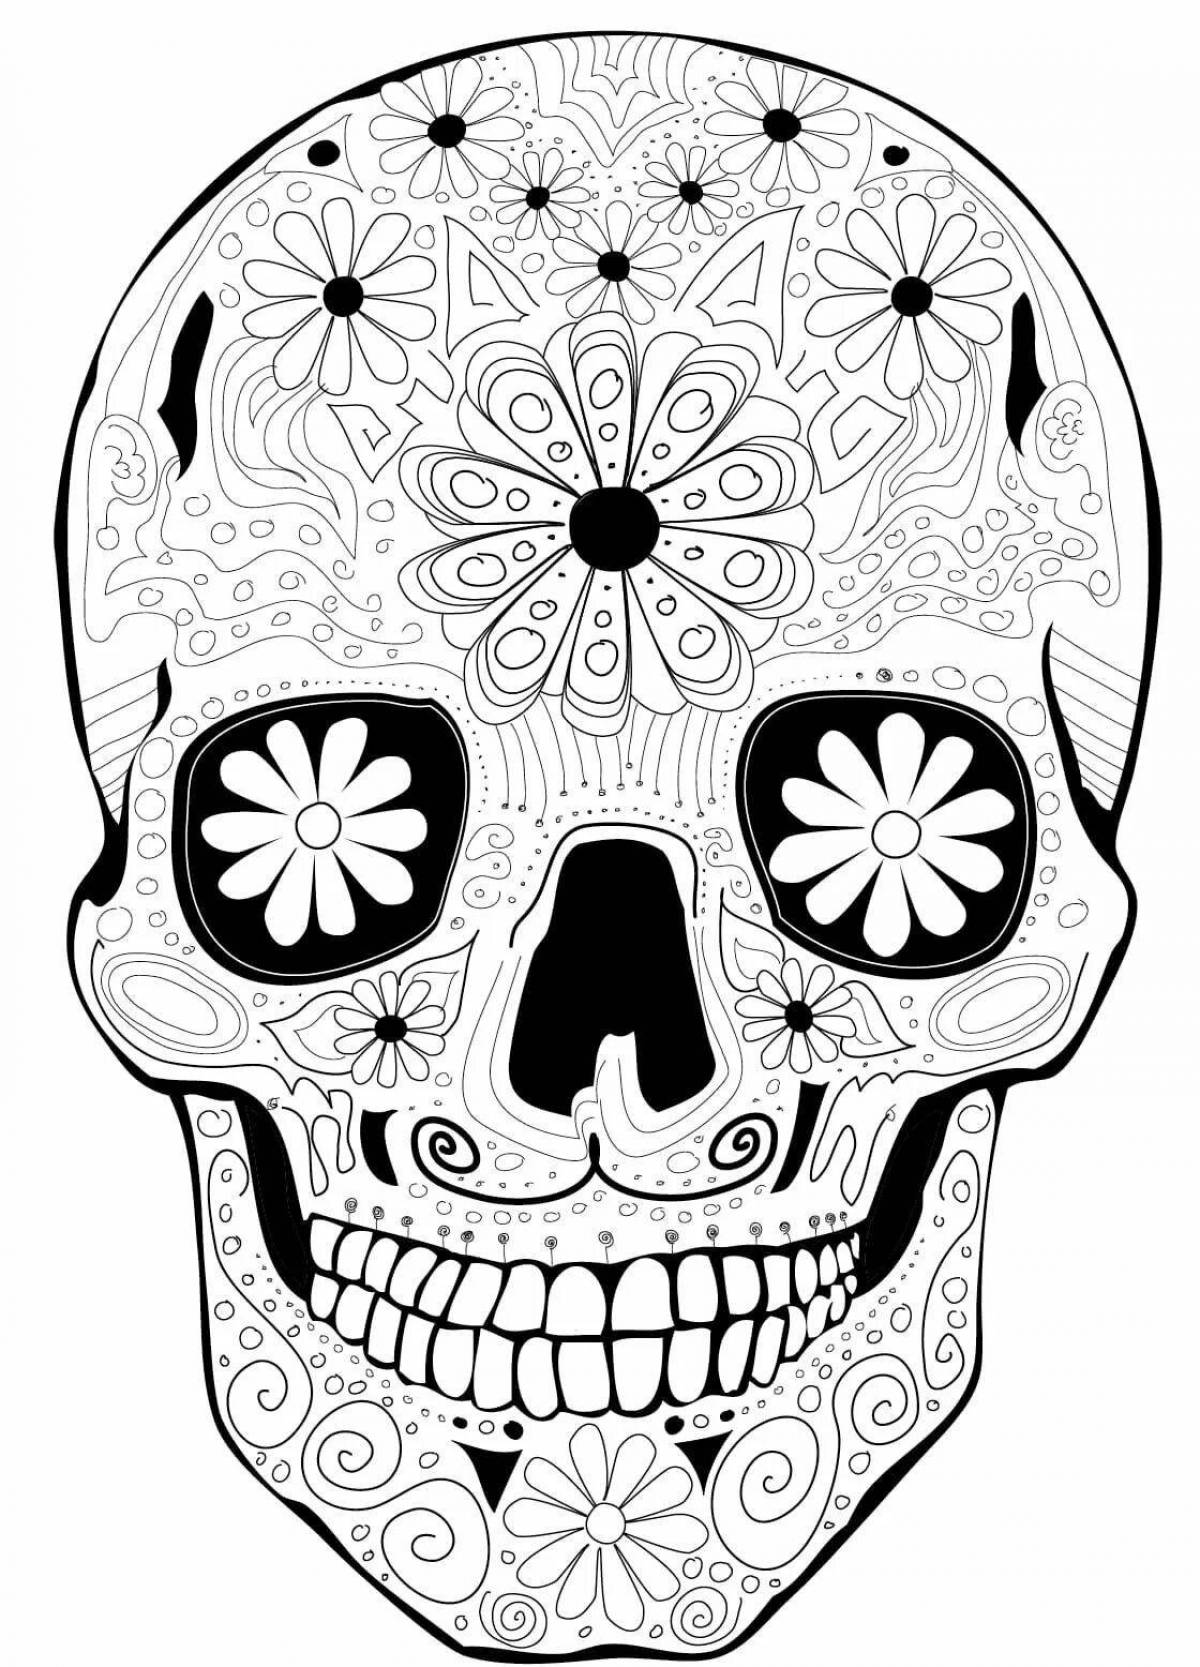 Vibrant skull coloring page for kids